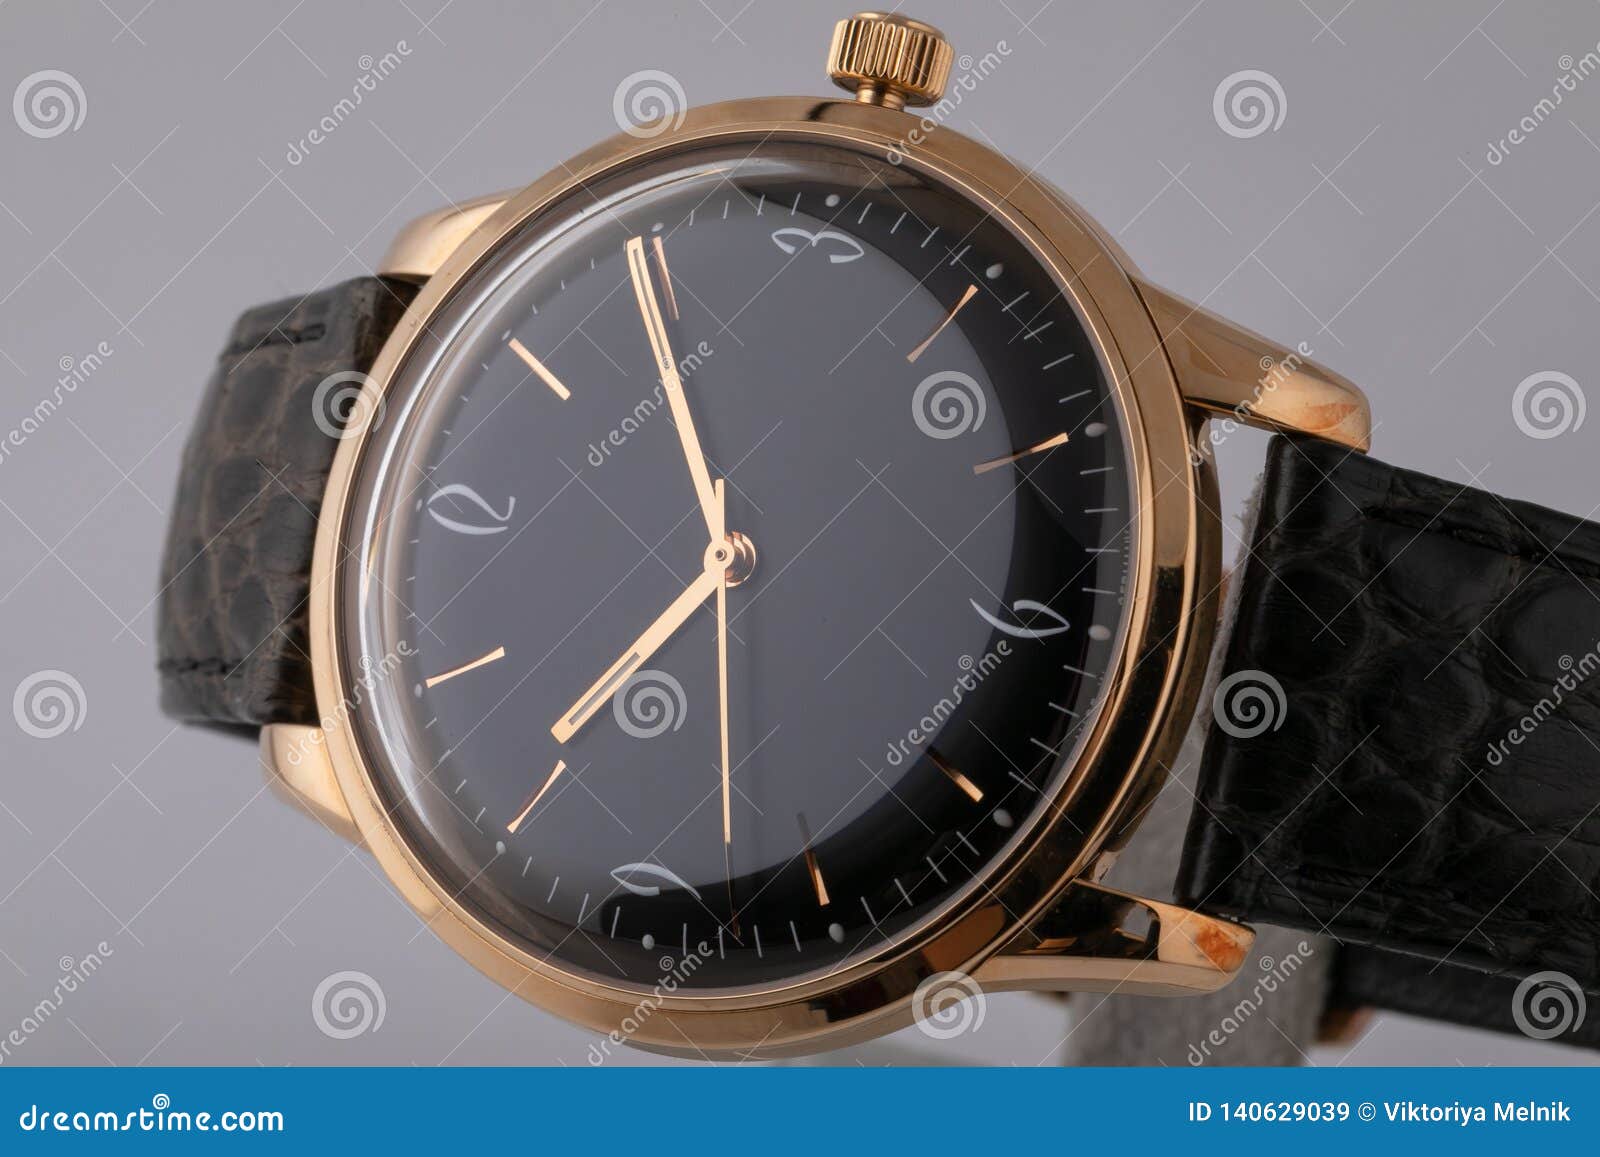 Men`s Watch with Black Leather Strap,black Dial, in Golden Body,golden ...